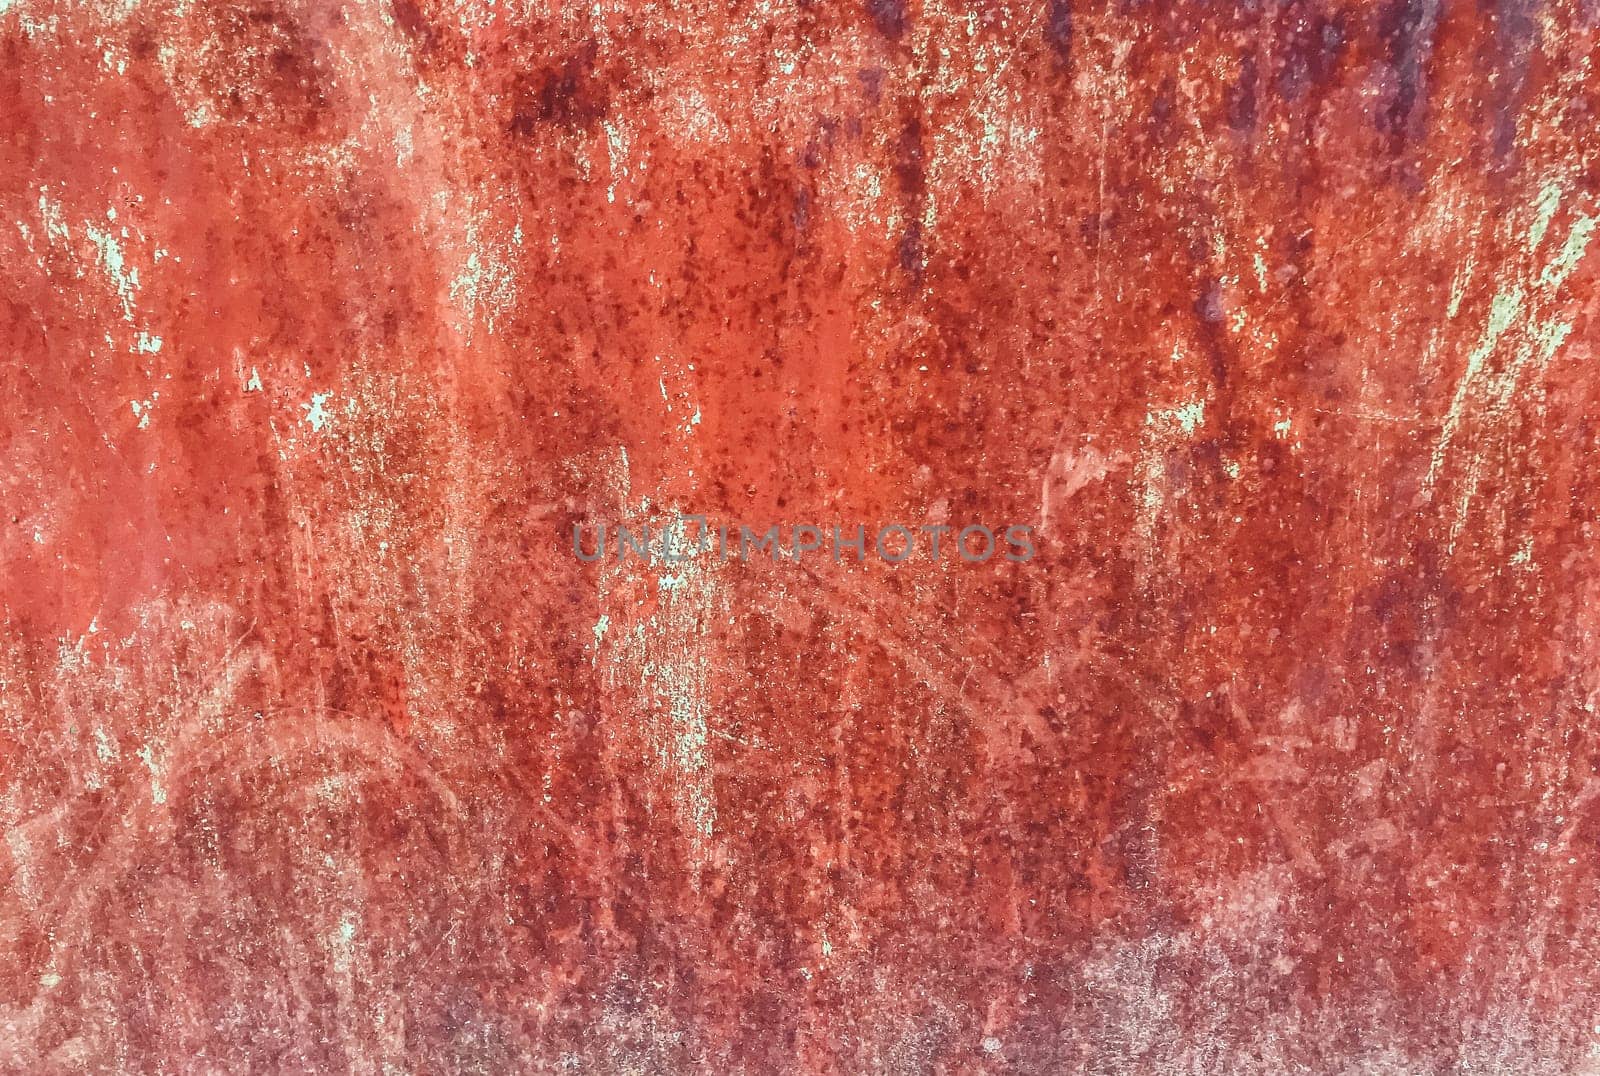 A red wall with a lot of dirt and grime on it. The wall is old and worn, with a rough texture